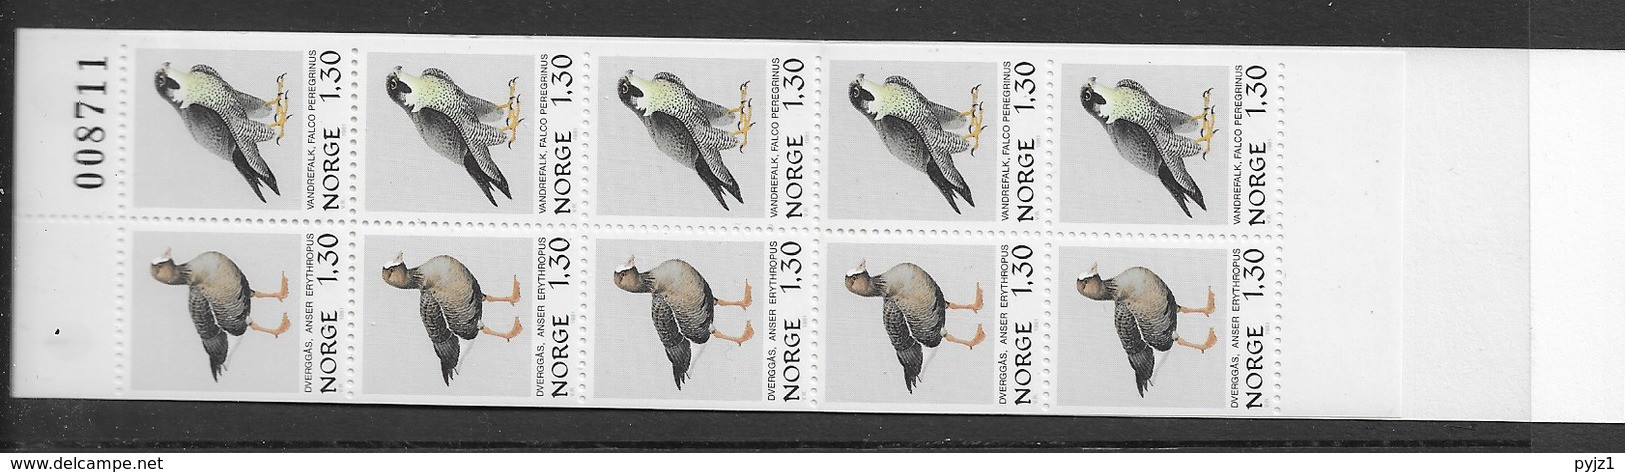 1981 MNH Norway, Booklet, Mi 827-28, Lower Margin Imperforate, Control Number - Booklets